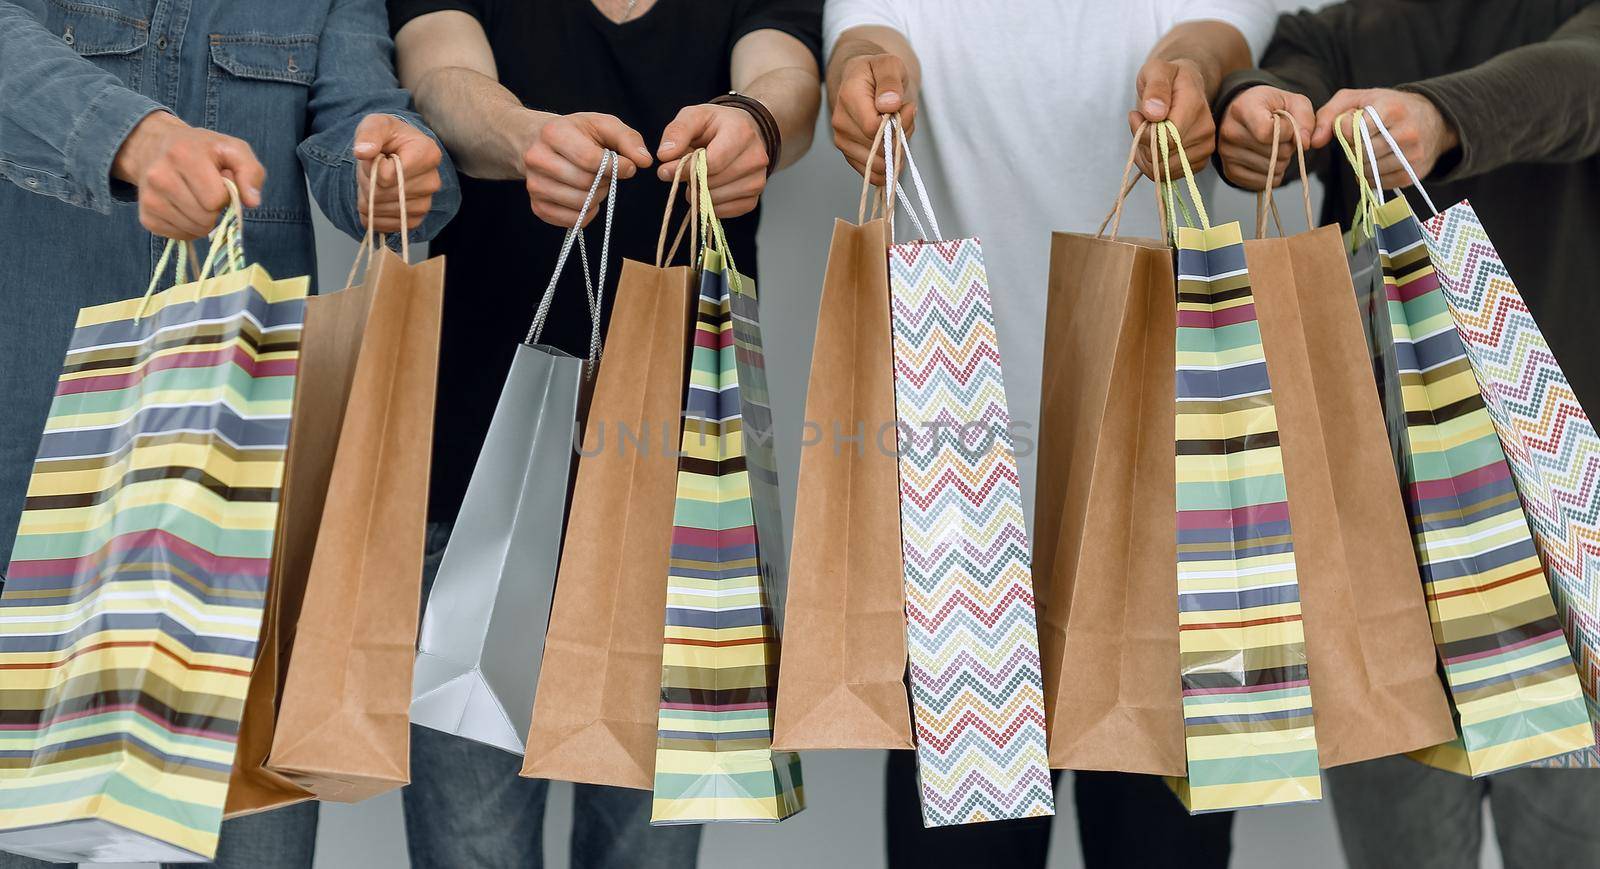 close up.group of students with shopping bags by asdf